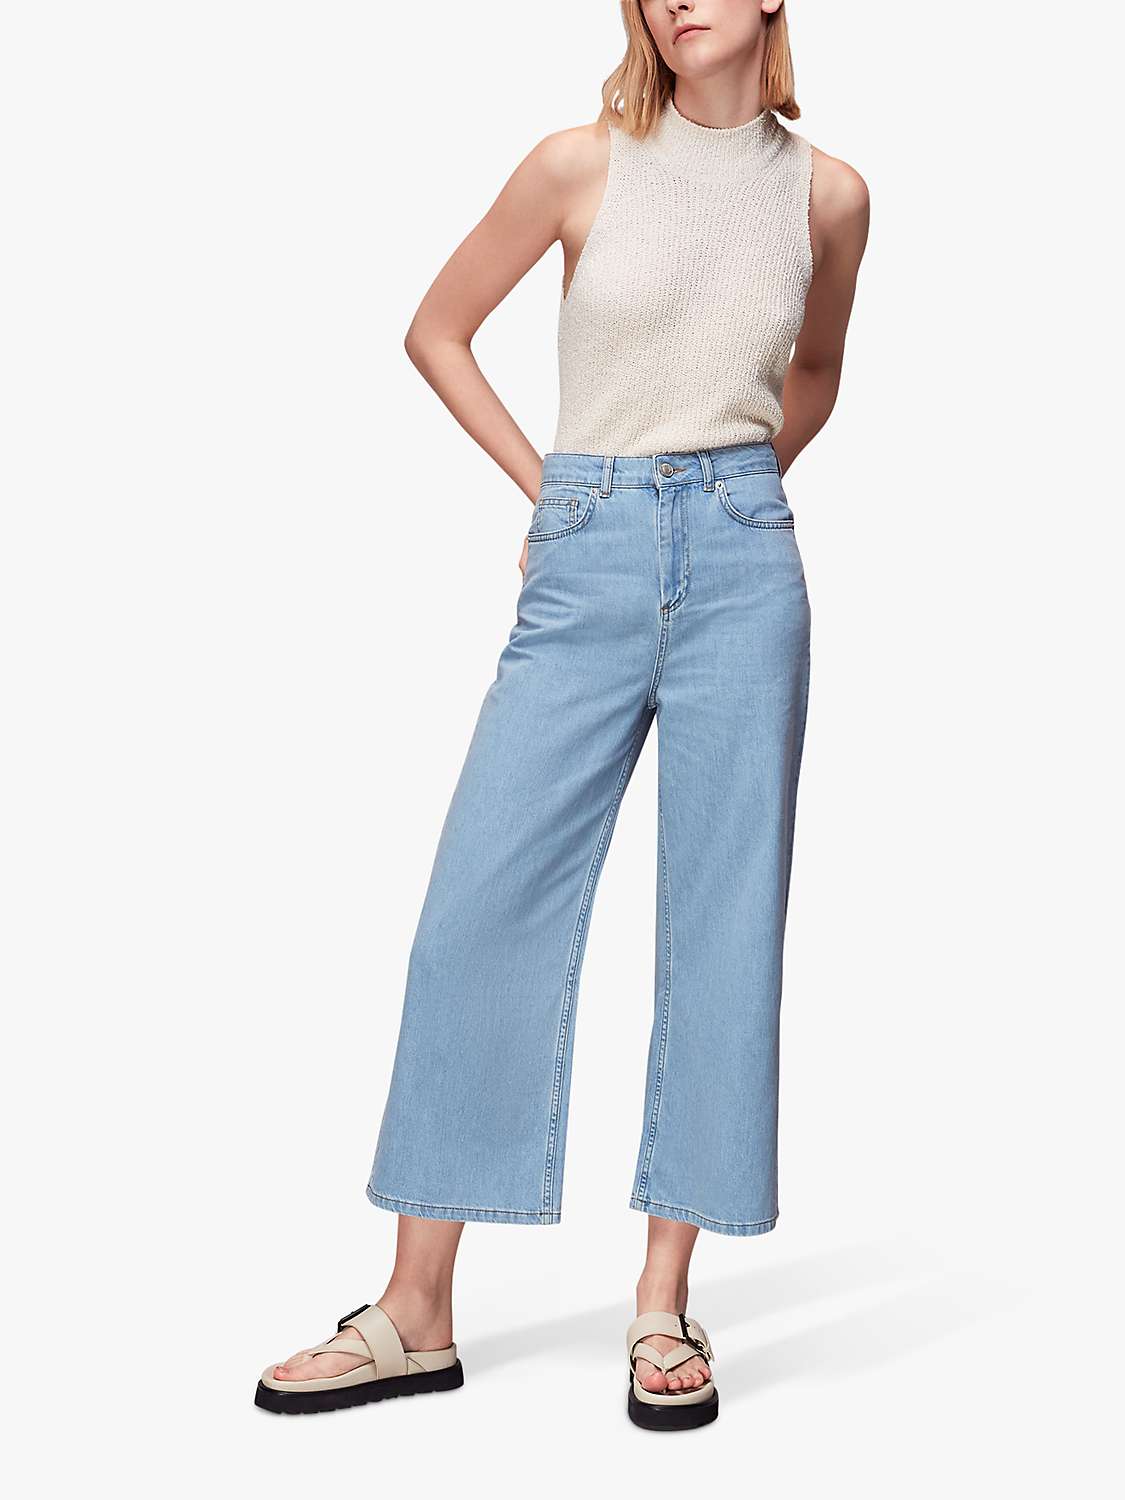 Buy Whistles Wide Leg Cropped Jeans, Light Blue Online at johnlewis.com